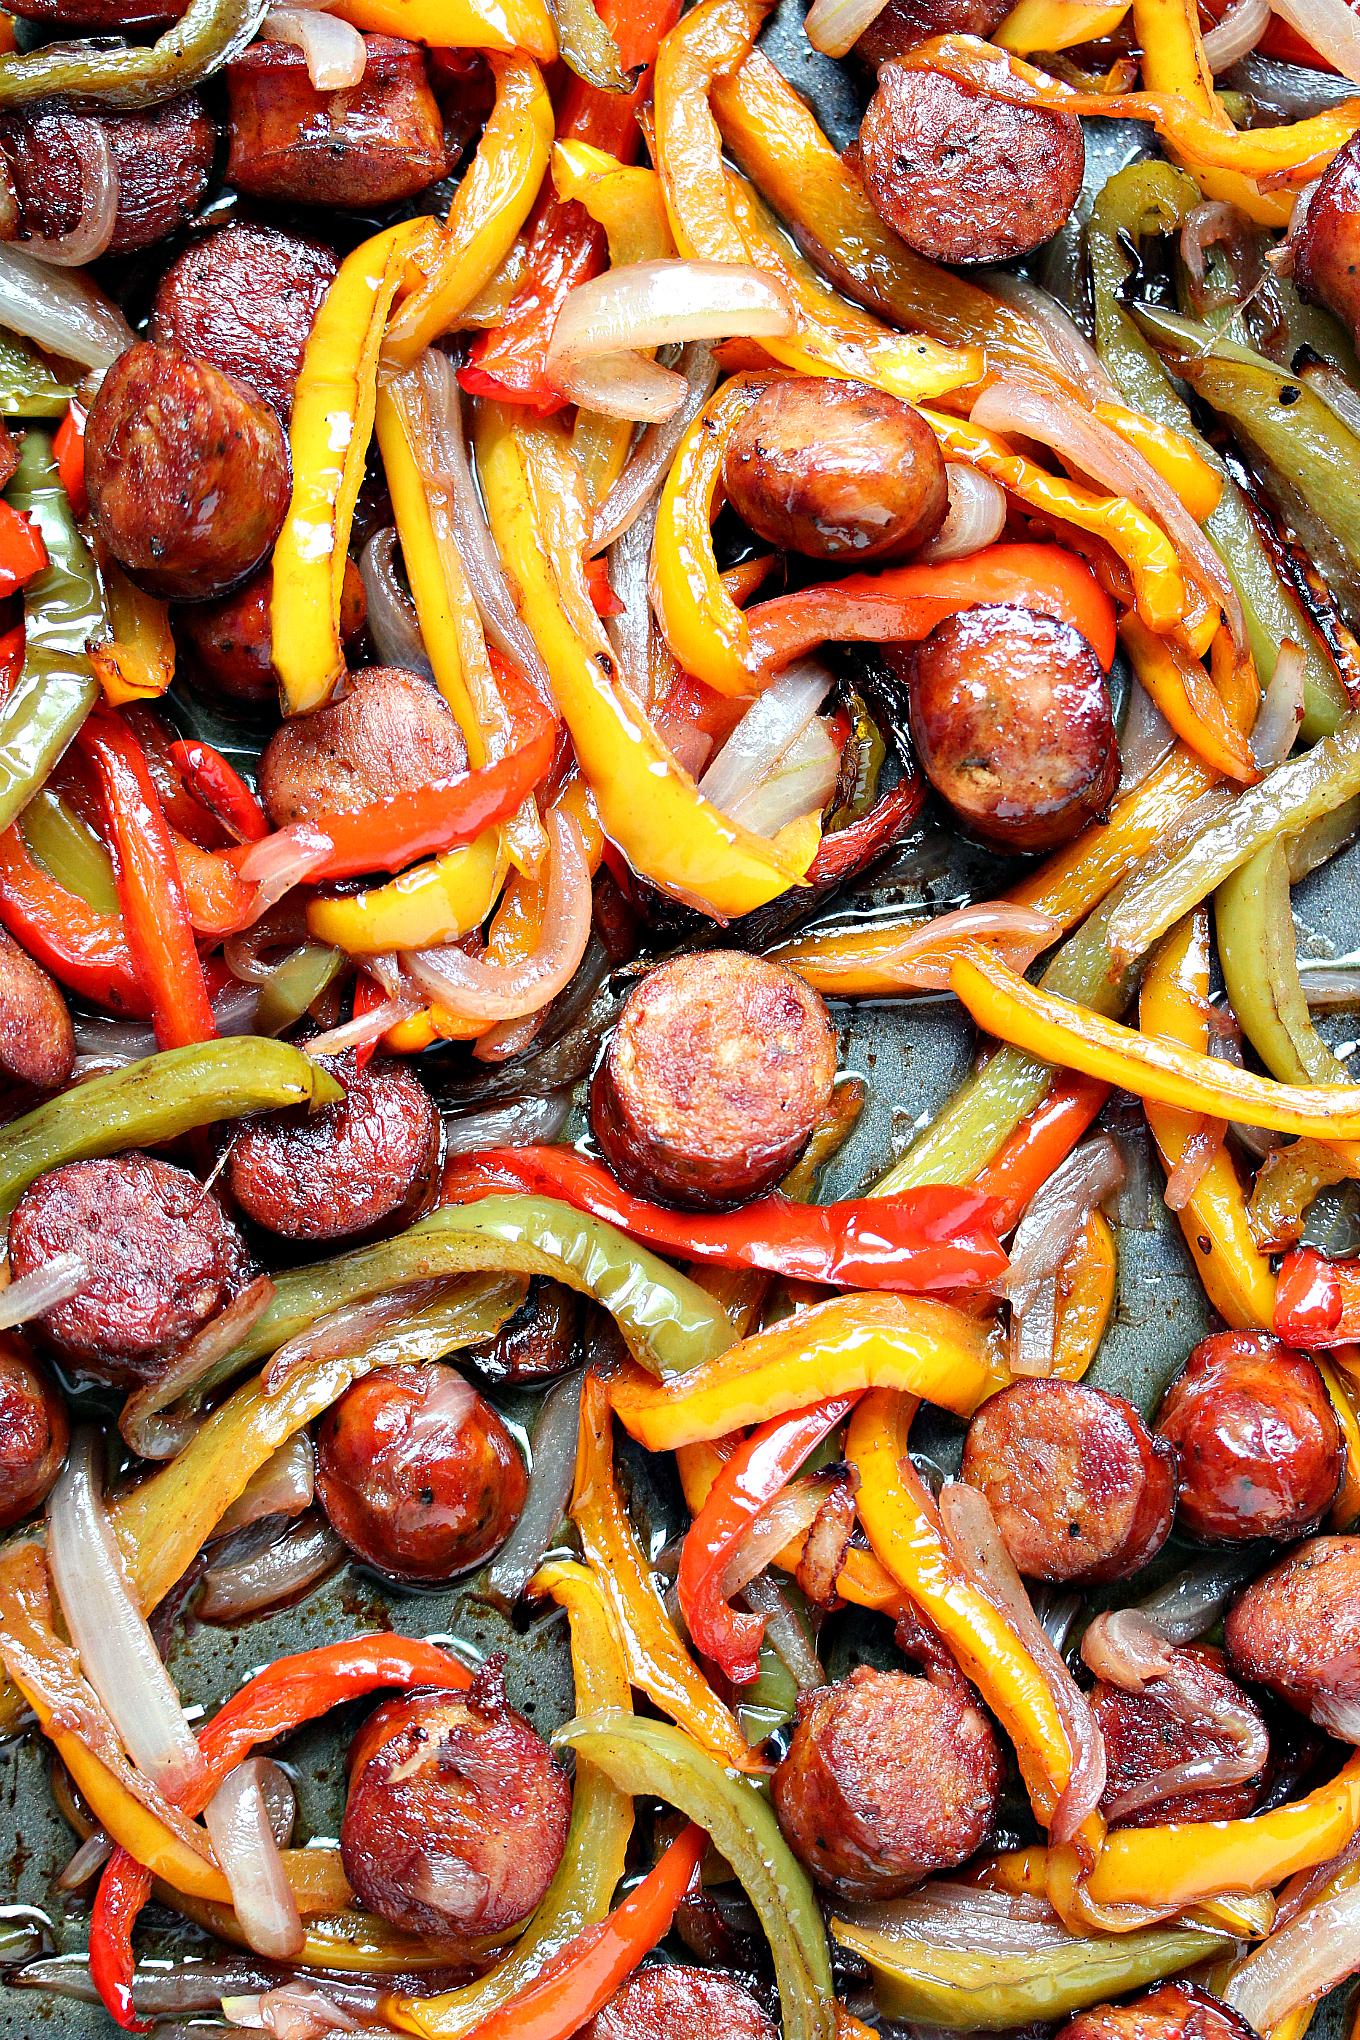 This sheet pan sausage and peppers recipe is simple to make yet full of flavour. It's perfect to eat on its own or pile it high on a hoagie bun. One pan, a few simple ingredients, and you have the perfect lunch or dinner recipe.